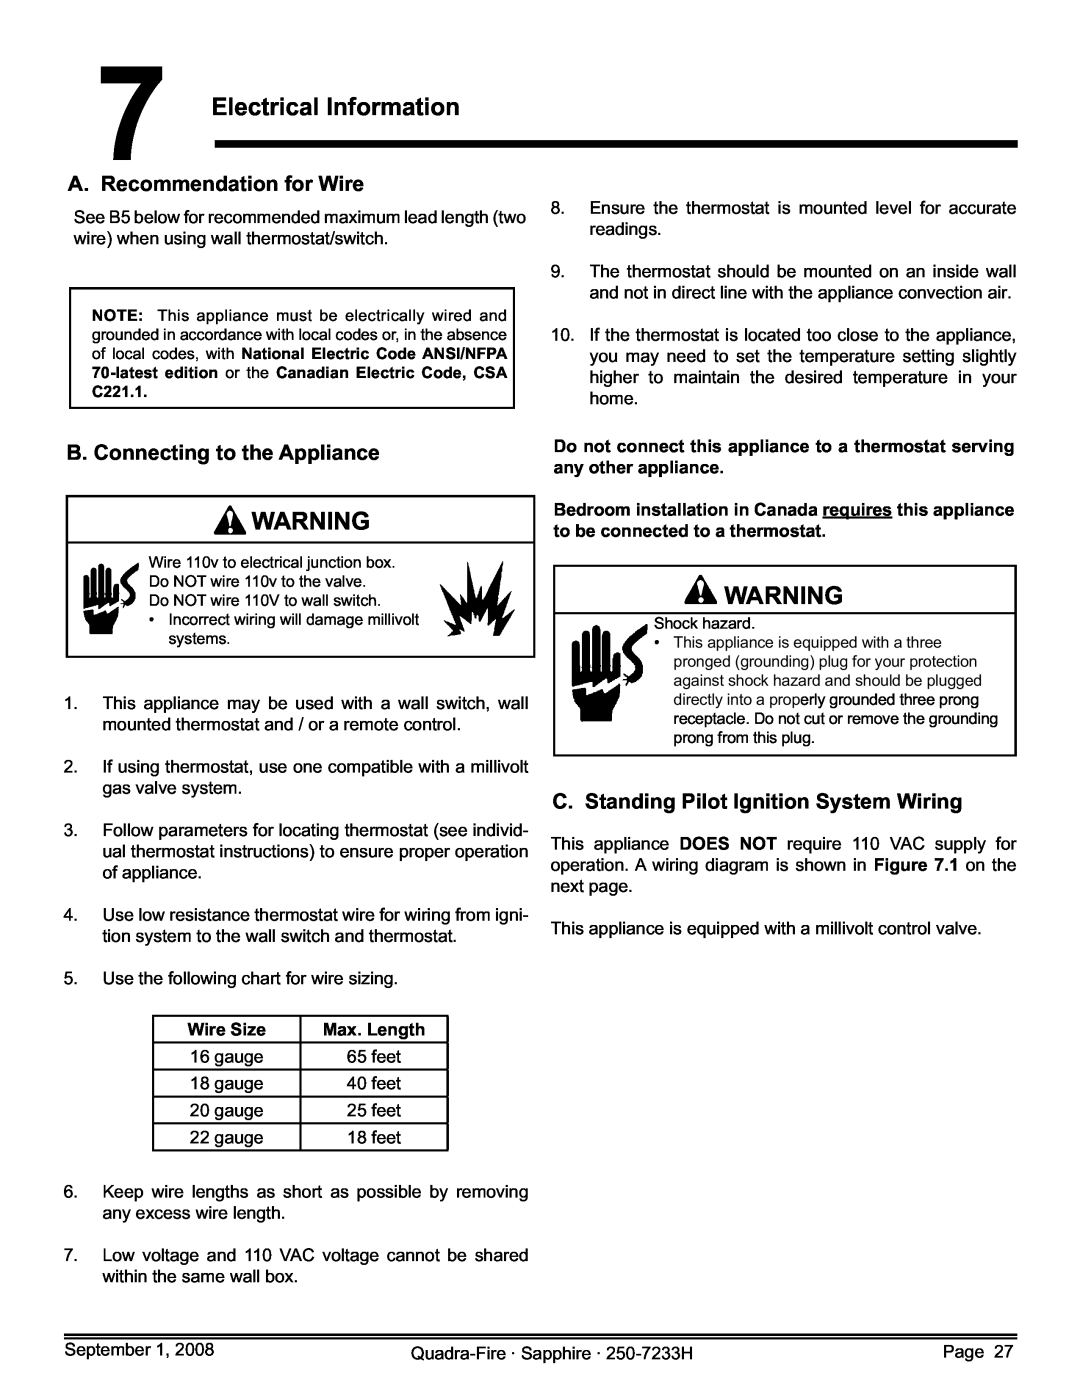 Hearth and Home Technologies 839-1460 Electrical Information, A. Recommendation for Wire, B. Connecting to the Appliance 